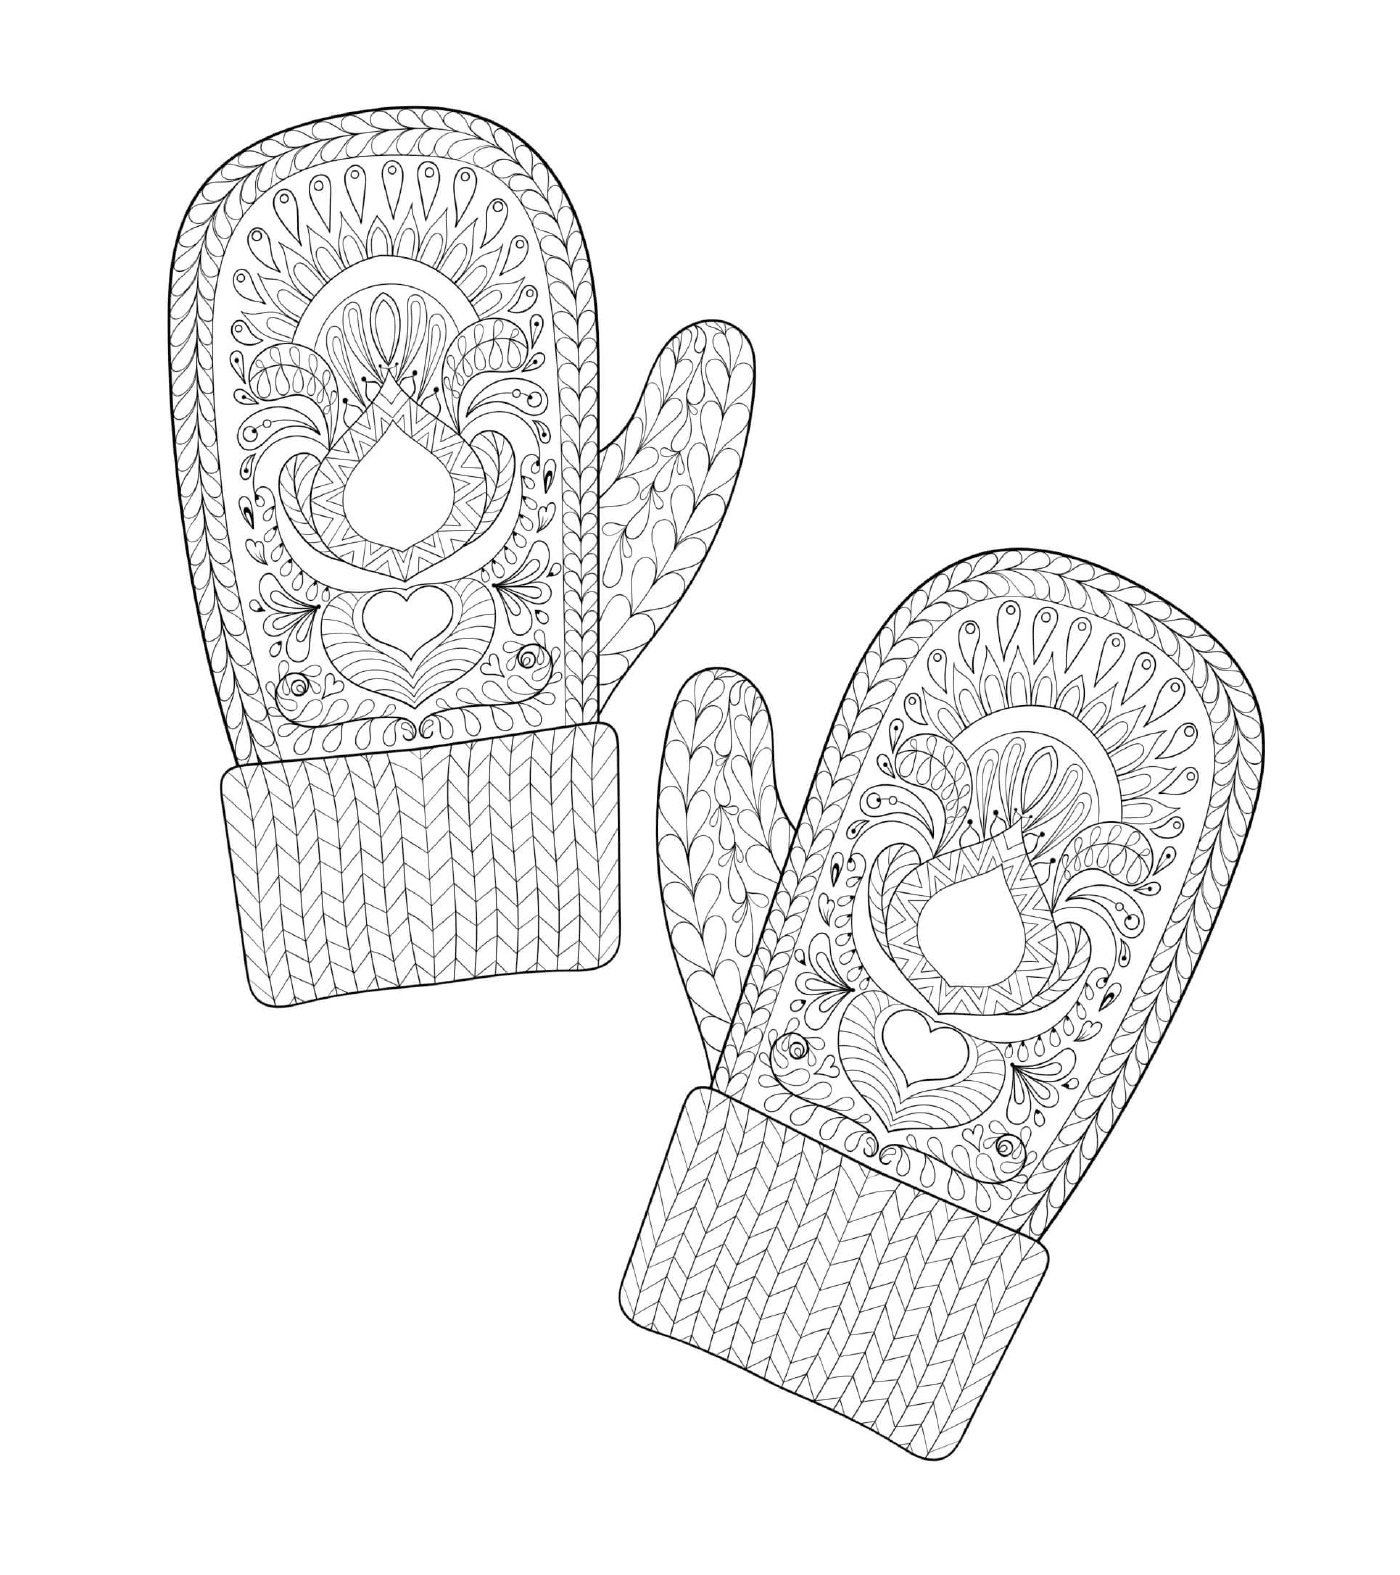  Two mittens are shown in the image 